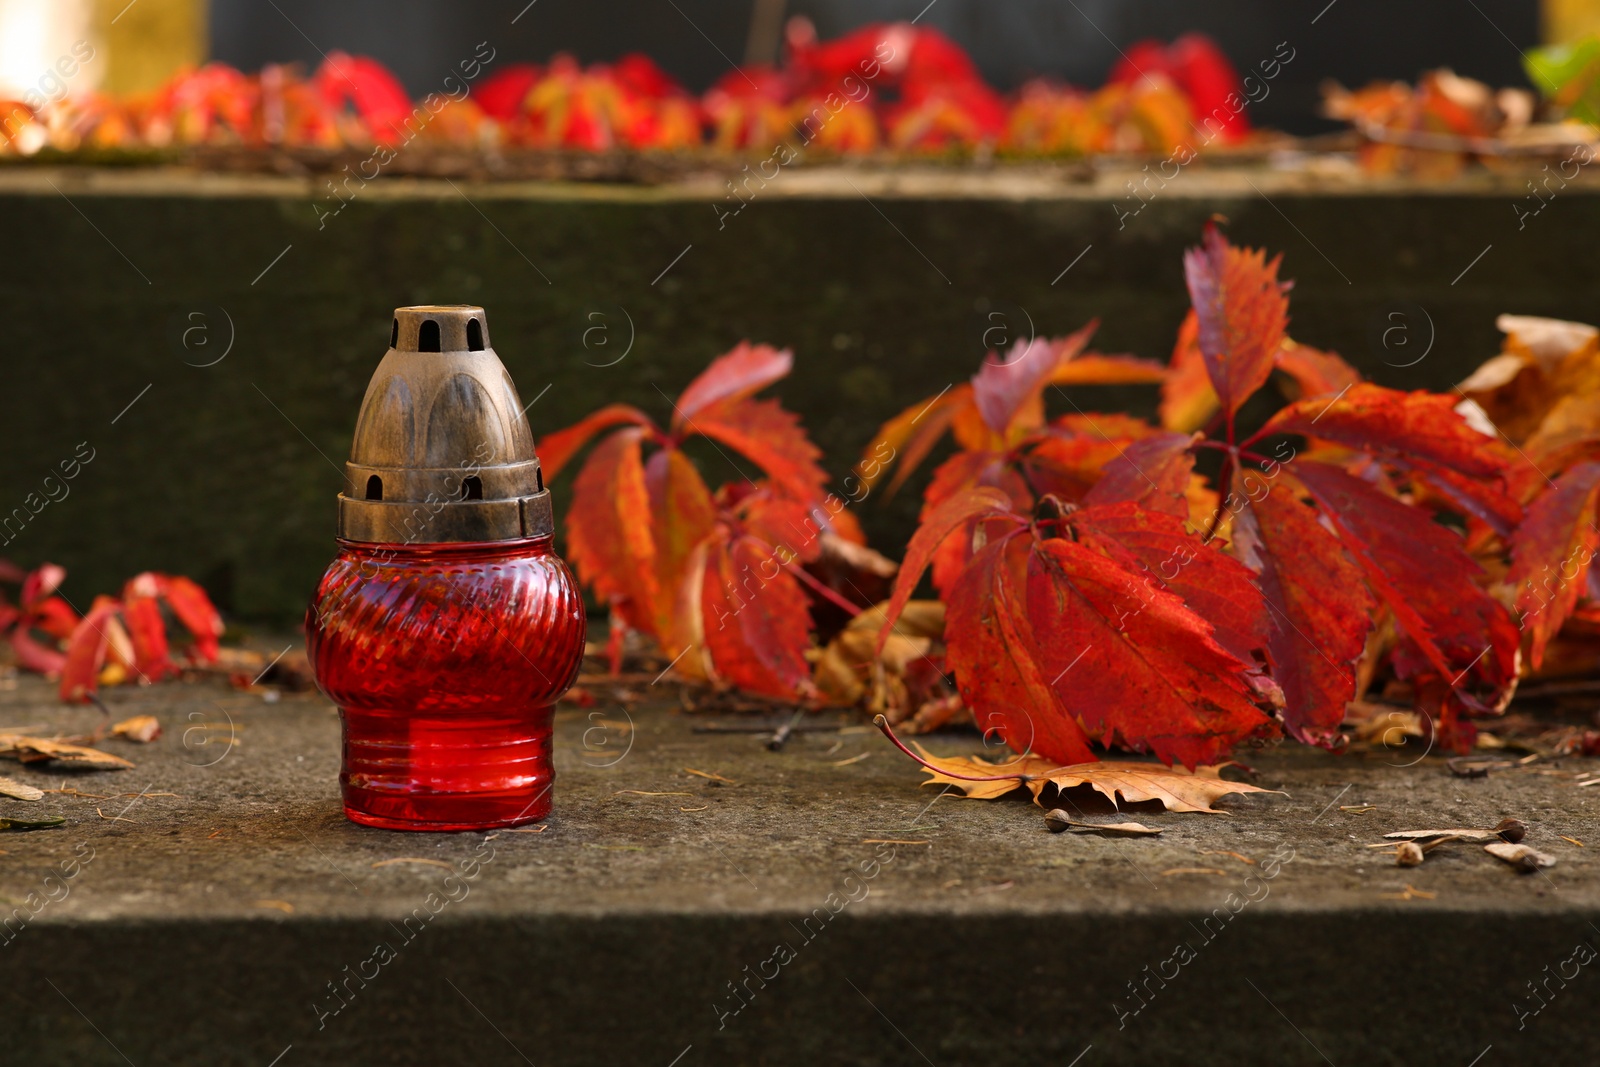 Photo of Red grave lantern and fallen leaves on stone surface in cemetery, space for text